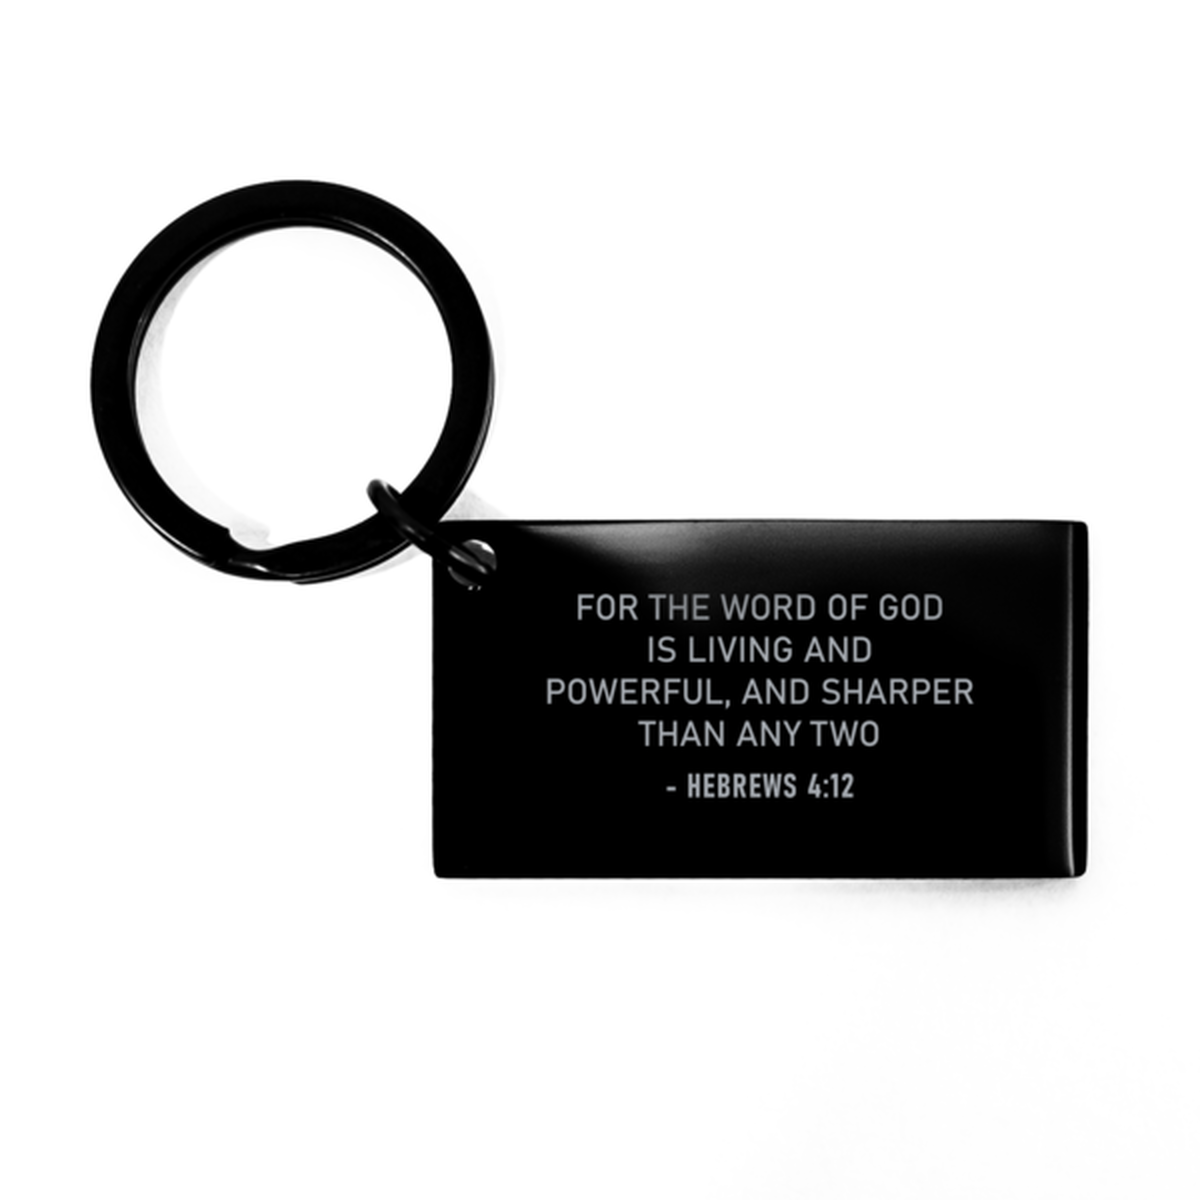 Bible Verse Black Keychain, Hebrews 4:12 For The Word Of God Is Living And Powerful, And, Christian Inspirational Key Ring Gifts For Men Women